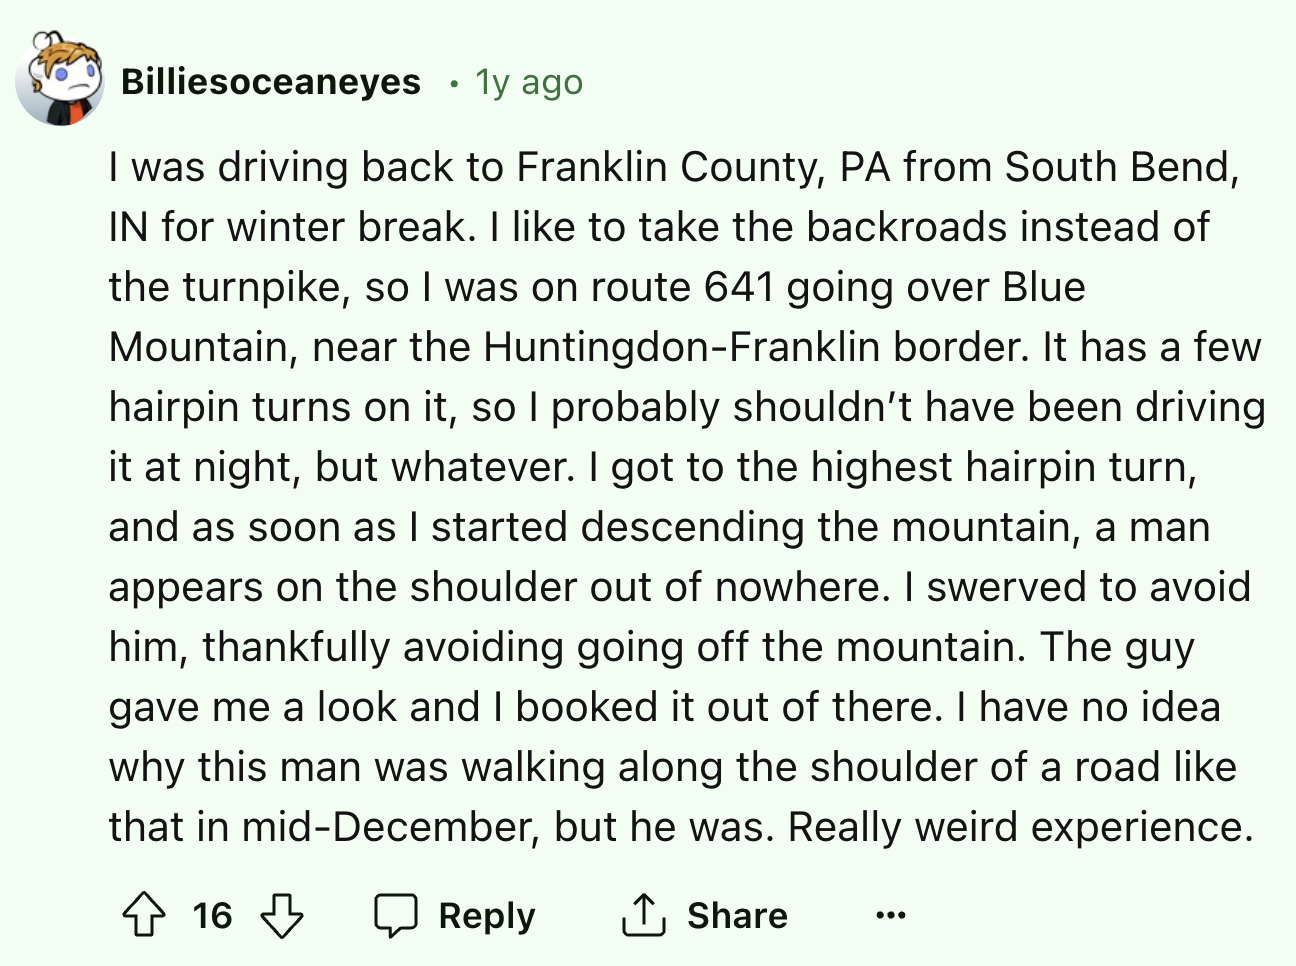 screenshot - Billiesoceaneyes 1y ago I was driving back to Franklin County, Pa from South Bend, In for winter break. I to take the backroads instead of the turnpike, so I was on route 641 going over Blue Mountain, near the HuntingdonFranklin border. It ha